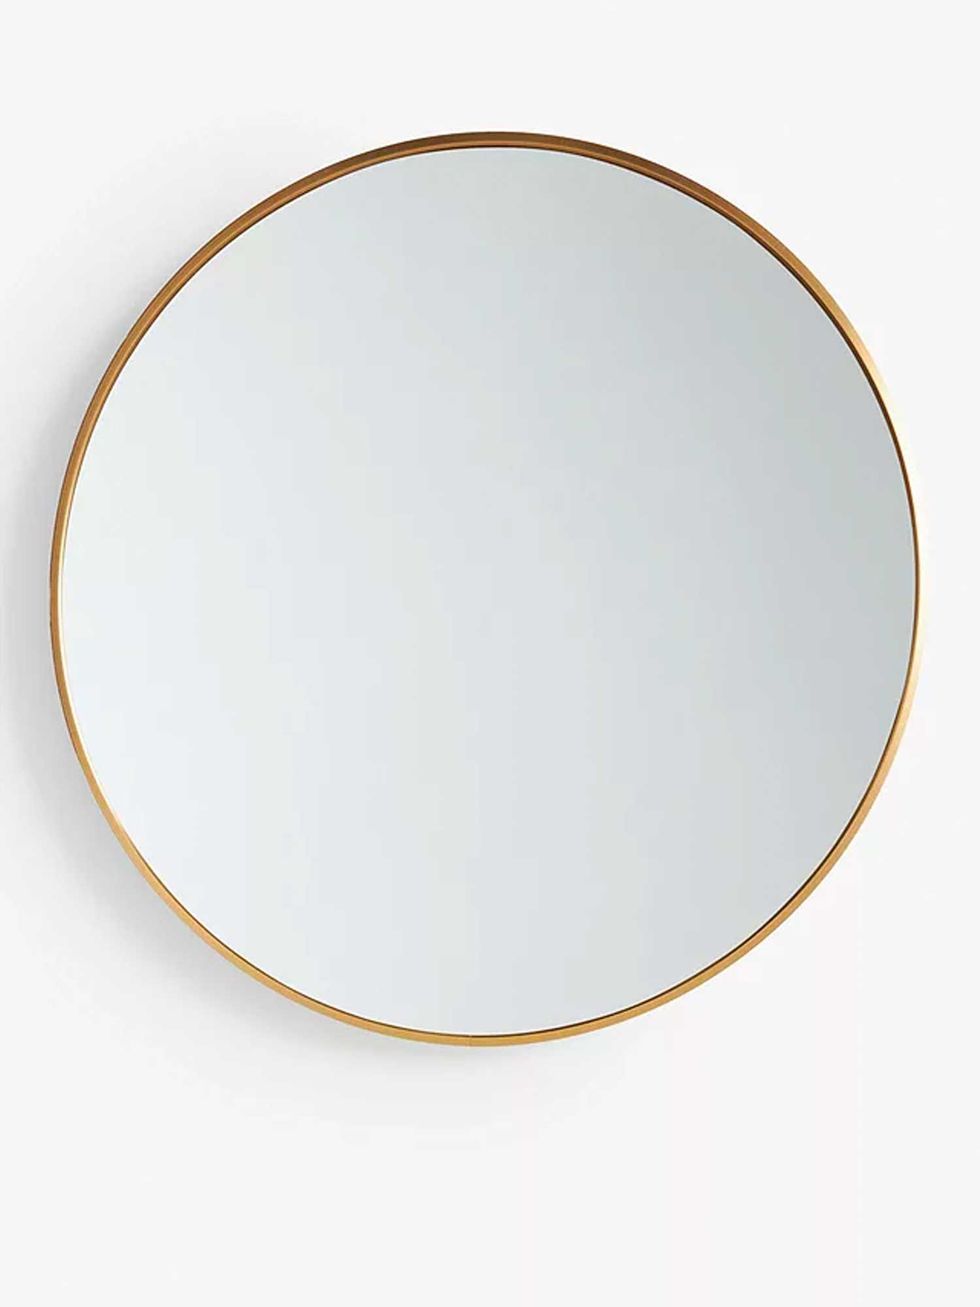 ANYDAY Thin Metal Frame Round Wall Mirror, 65cm, Gold